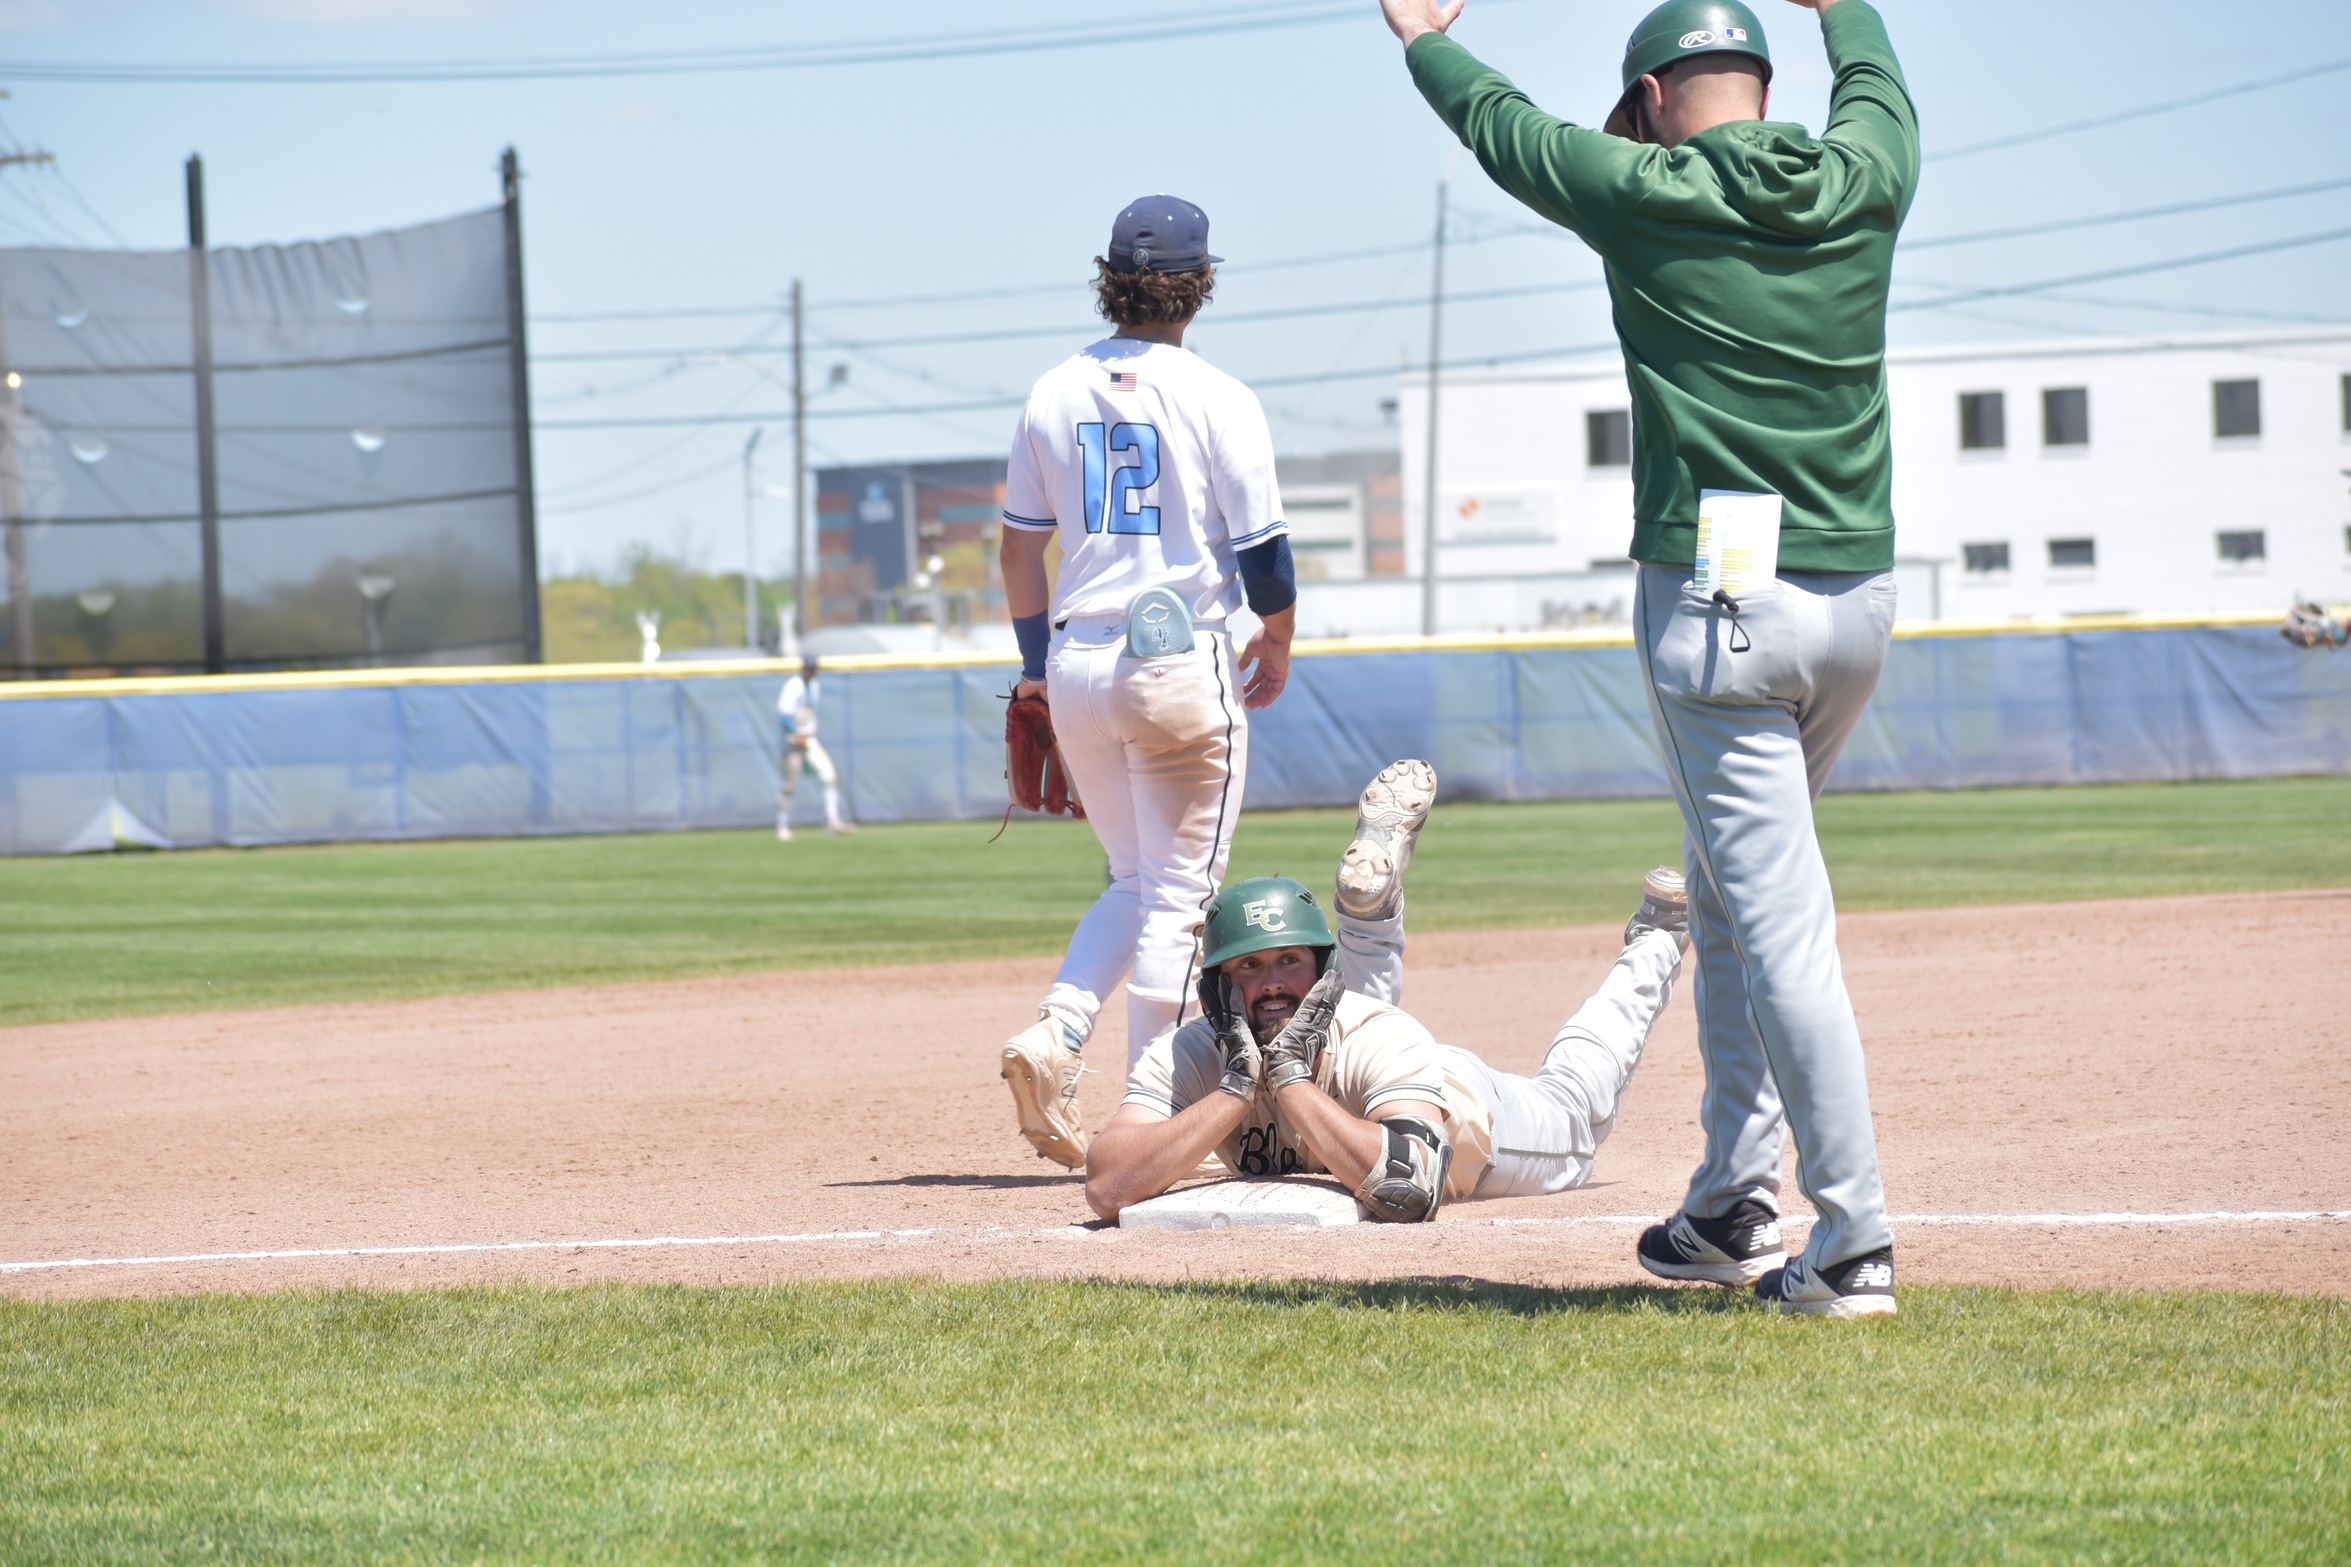 Blazers Stay Alive in GNAC Tournament After 10-5 Victory Over Lasers